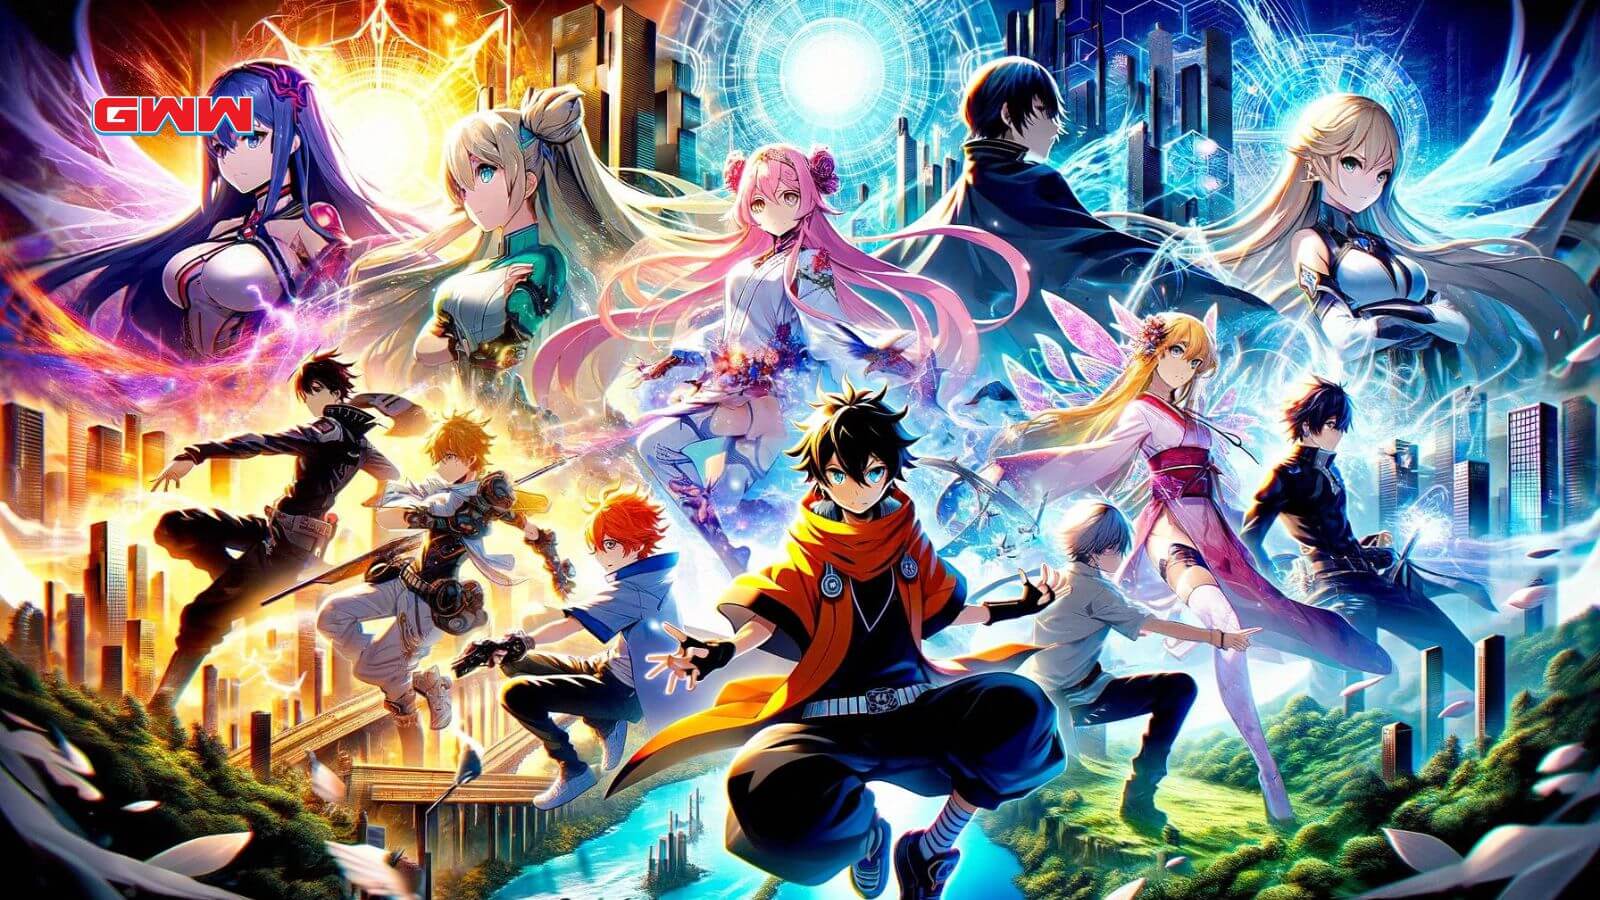 A vibrant and dynamic anime scene showcasing five popular anime characters from different series, each in a distinct and powerful pose.